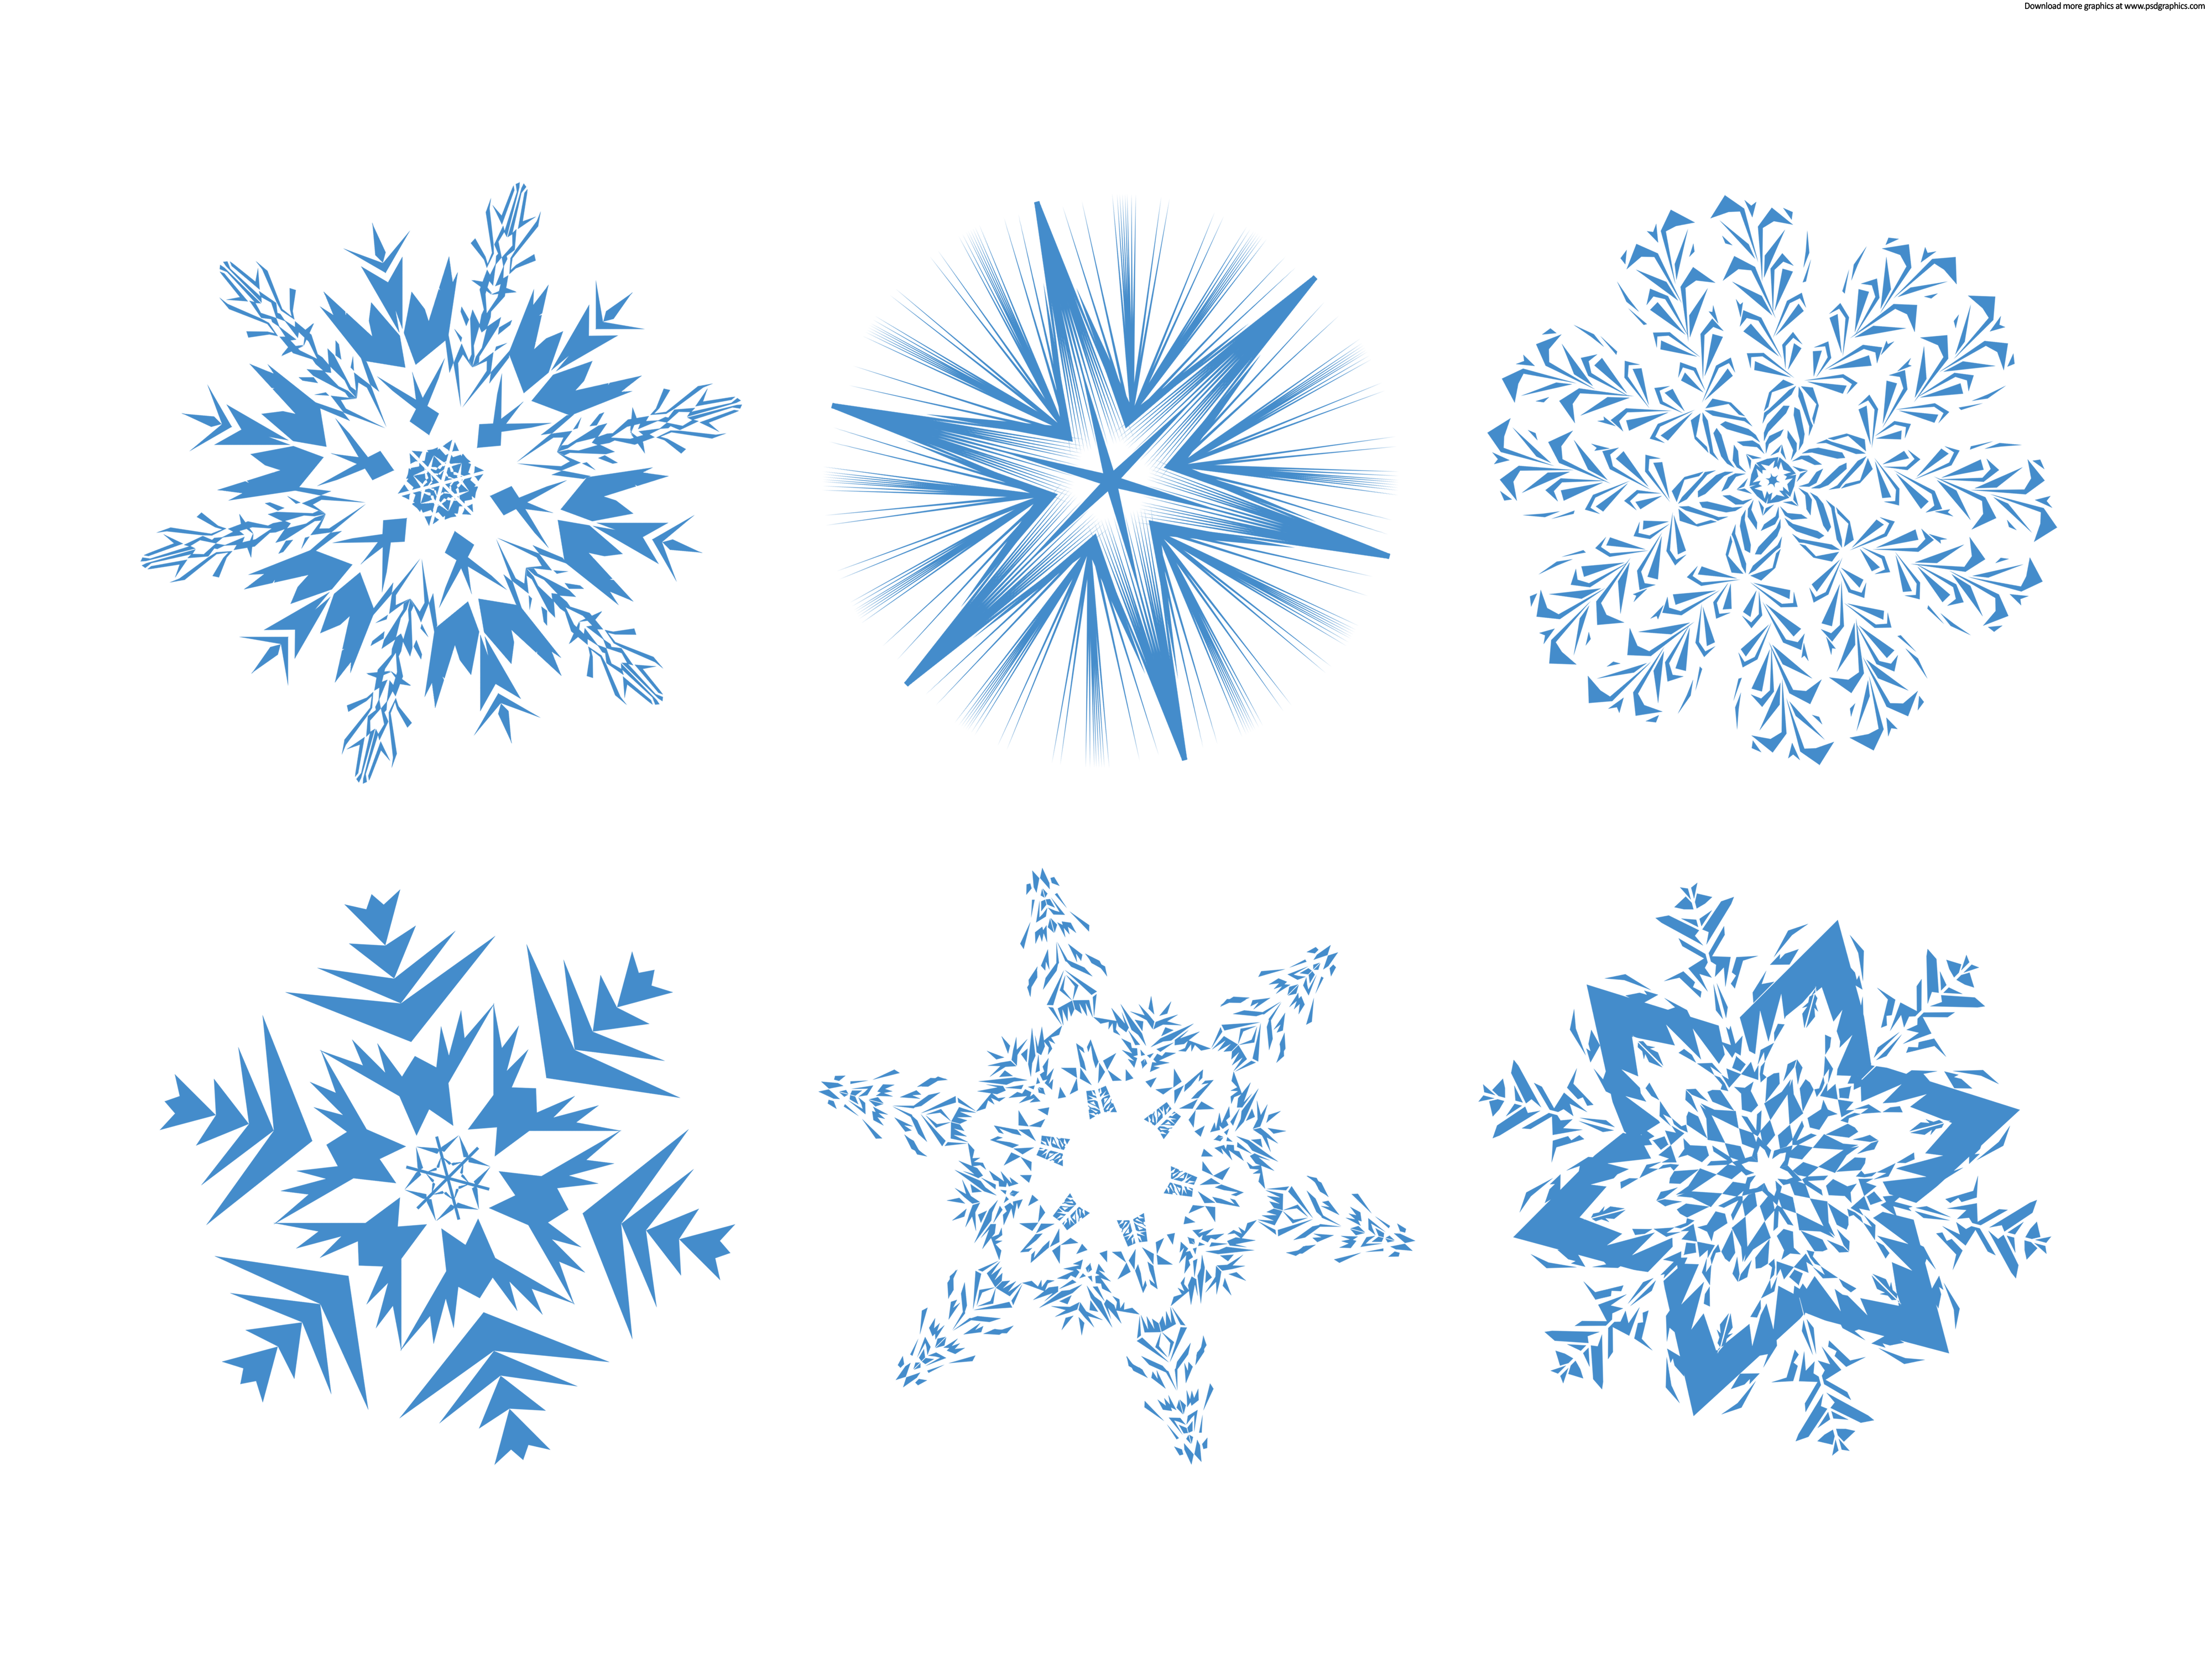 Snowflakes PNG Clipart